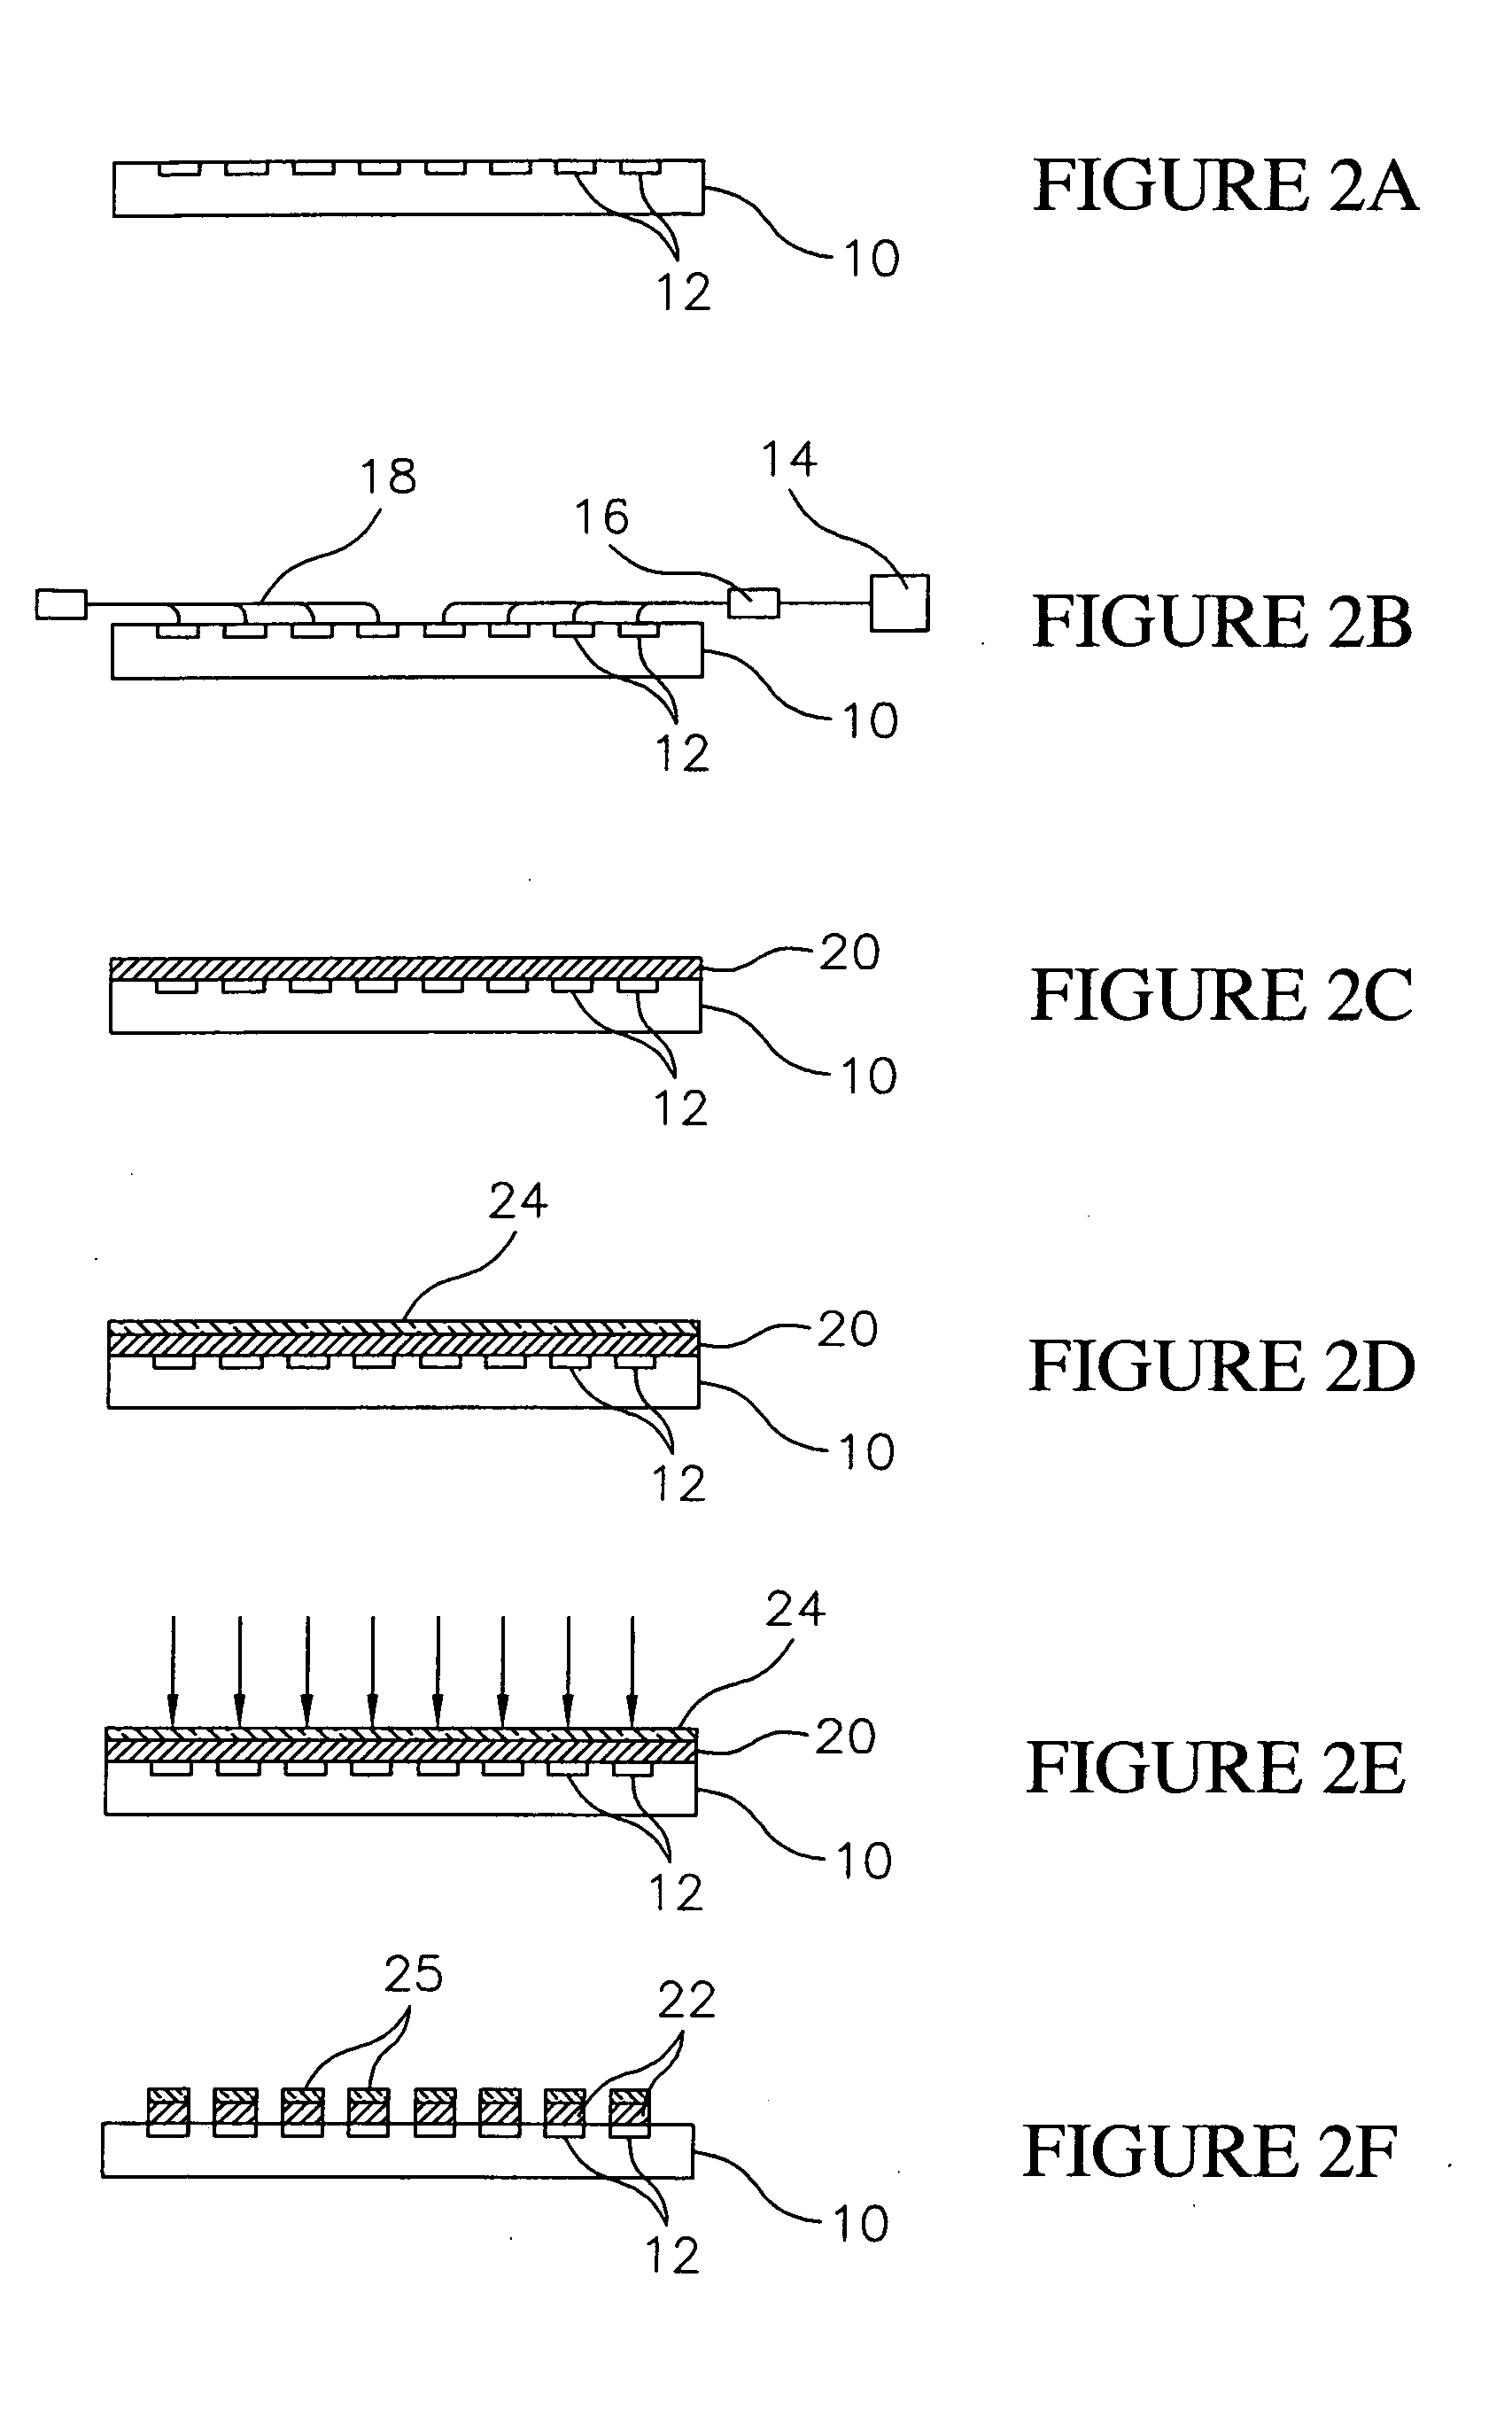 Semiconductor test board having laser patterned conductors